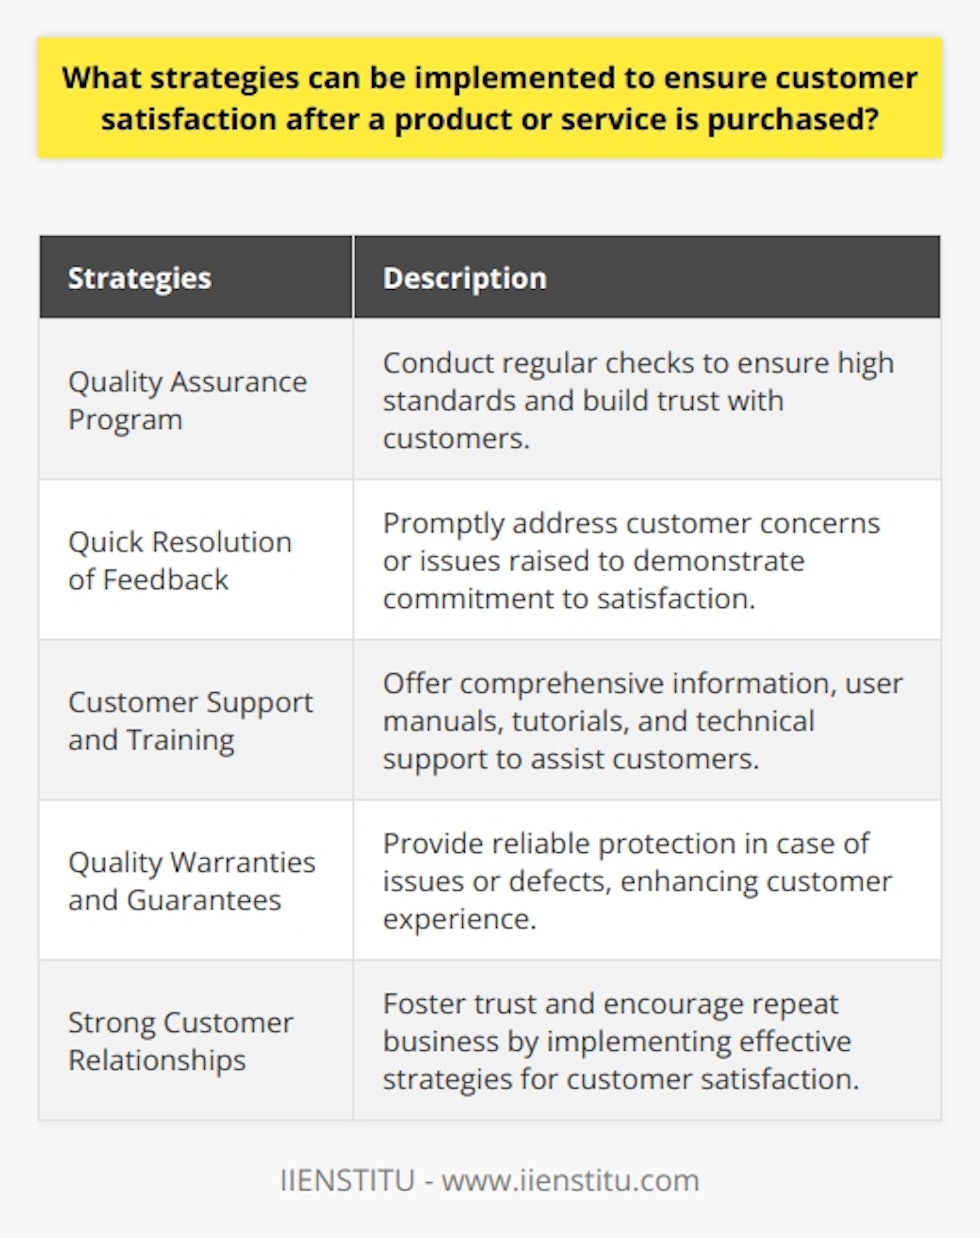 One strategy to ensure customer satisfaction after a product or service is purchased is by implementing a strong quality assurance program. This involves conducting regular checks on the product or service to ensure it meets the highest standards. By consistently delivering a high-quality product or service, companies can establish trust with their customers and increase their satisfaction.Additionally, providing quick and efficient resolution to customer feedback is crucial in maintaining customer satisfaction. It is essential for businesses to have a dedicated customer service team that can promptly address any concerns or issues raised by customers. By actively listening to customer feedback and resolving any problems in a timely manner, companies can demonstrate their commitment to customer satisfaction.Another strategy is to offer adequate customer support and training. This includes providing comprehensive information and guidance to customers on how to best utilize the product or service. By offering resources such as user manuals, tutorials, and technical support, companies can ensure that customers feel supported and confident in their purchase. This in turn increases customer satisfaction and reduces the likelihood of returns or complaints.Furthermore, providing quality warranties and guarantees can go a long way in ensuring customer satisfaction. By offering a warranty or guarantee, companies are demonstrating their confidence in the product or service. This gives customers peace of mind, knowing that they are protected in case of any issues or defects. A reliable warranty or guarantee can significantly enhance the overall customer experience and satisfaction.In conclusion, there are several strategies that companies can implement to ensure customer satisfaction after a product or service is purchased. These include implementing quality assurance, providing quick customer feedback resolution, offering adequate customer support and training, and providing quality warranties and guarantees. By focusing on these areas, companies can foster strong customer relationships, encourage repeat business, and ultimately achieve long-term success.